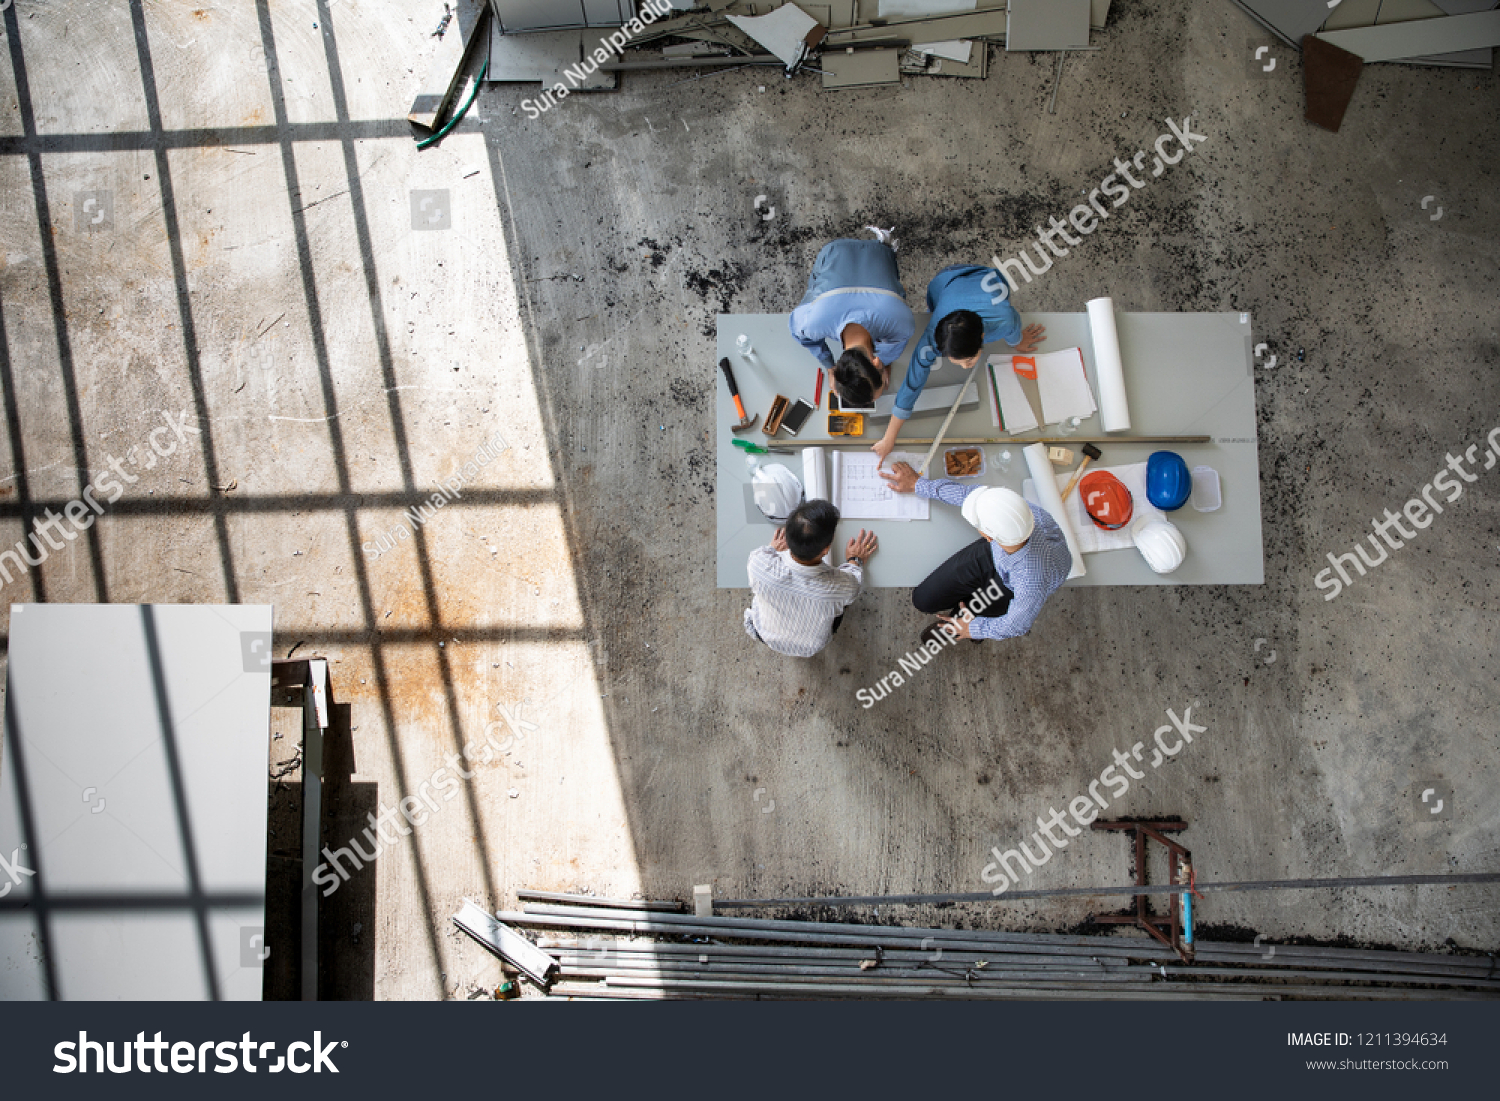 Four persons professional team of engineers talk together to review material in construction site, taken from above high angle, top view photo with shadow of window frame on floor. #1211394634